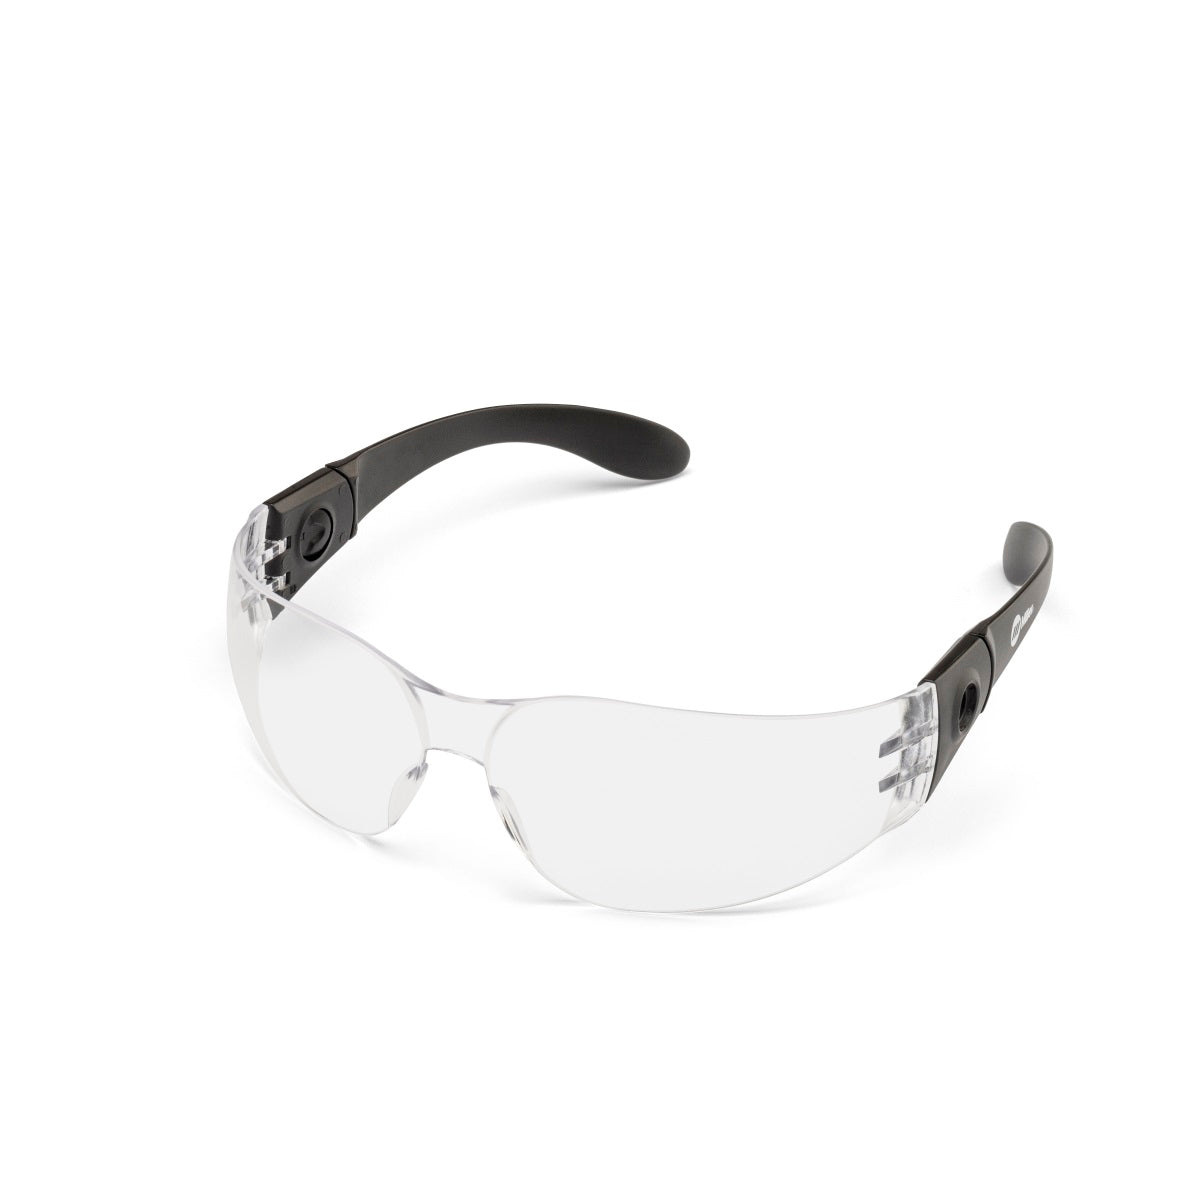 The Miller classic safety glasses offer lightweight, anti-fog, shatterproof eye protection. 